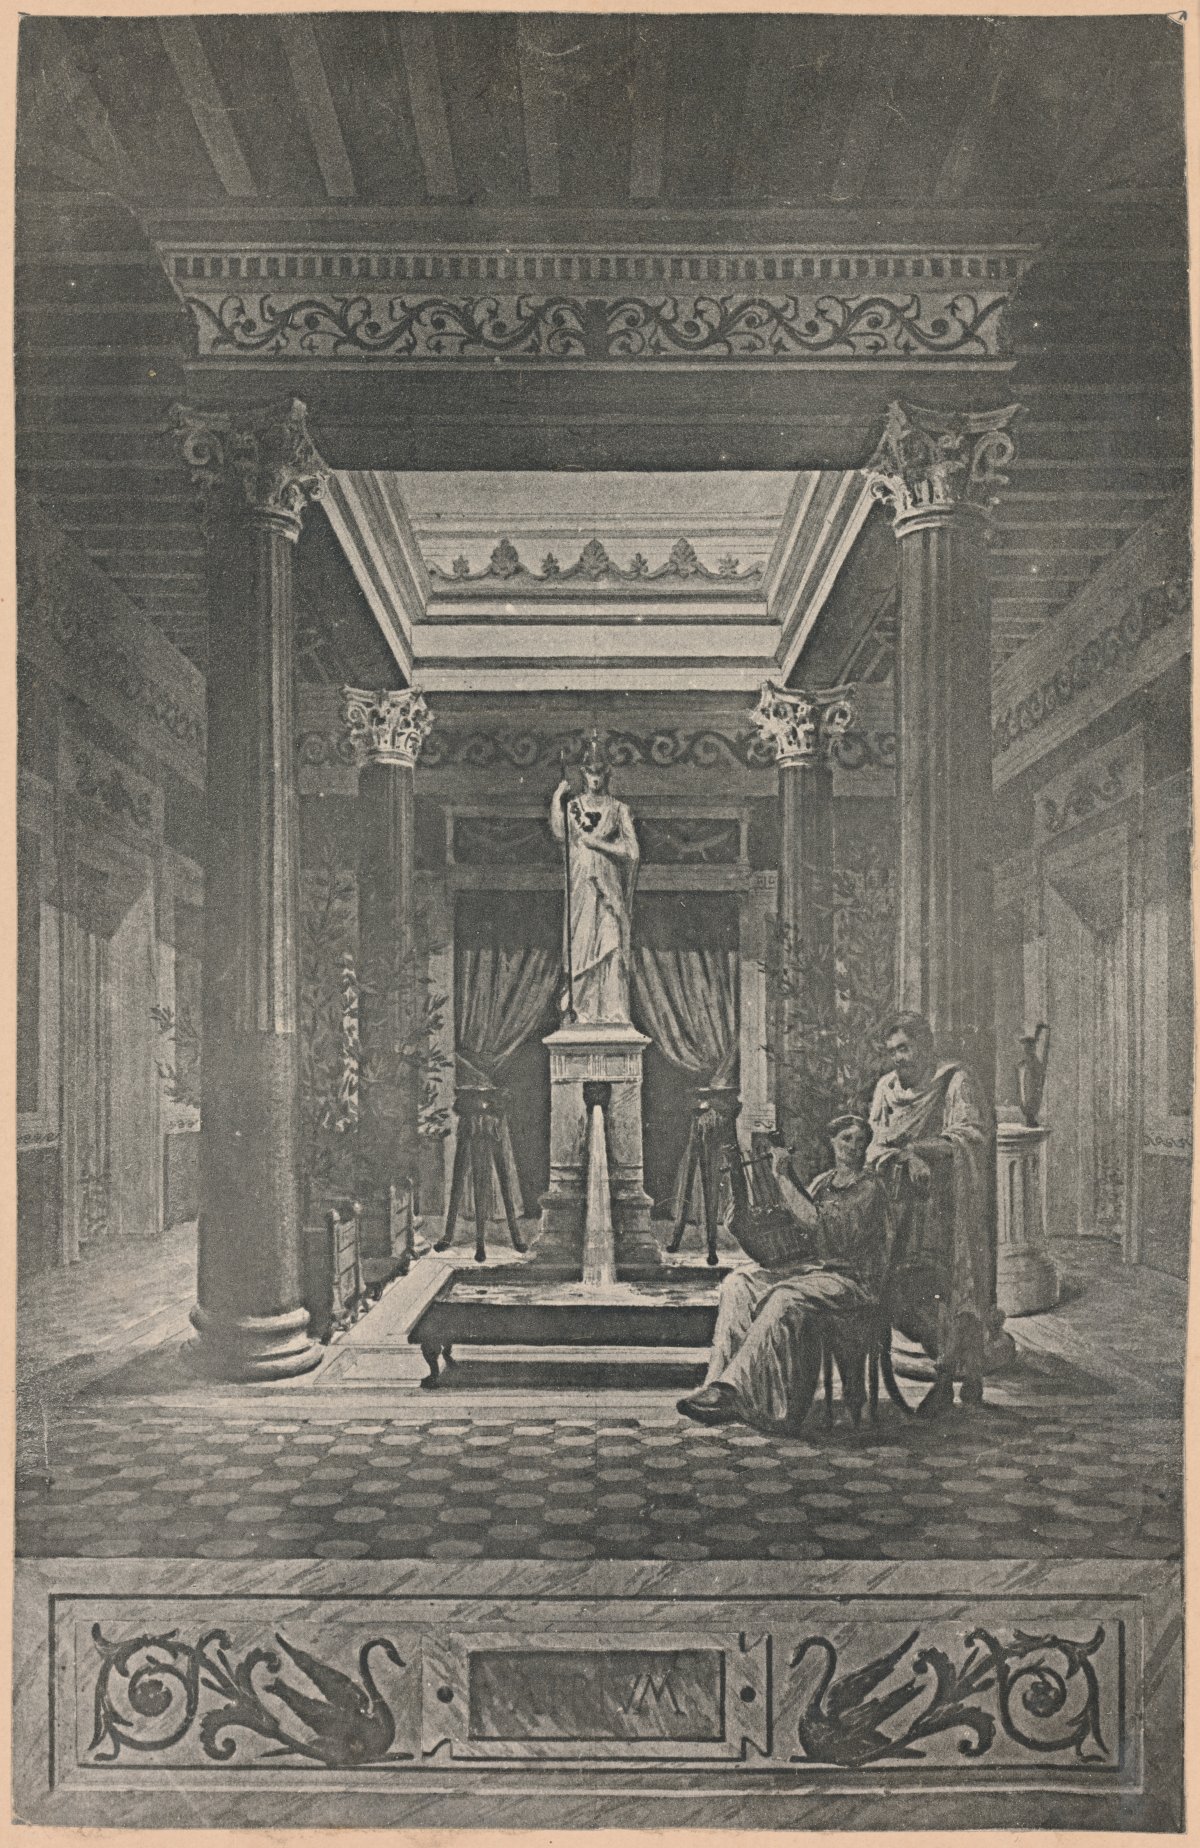 A print showing the interior of a wealthy Roman villa. There is a large statue in an atrium. A man and a woman sit near to the state. The woman is playing a lyre.